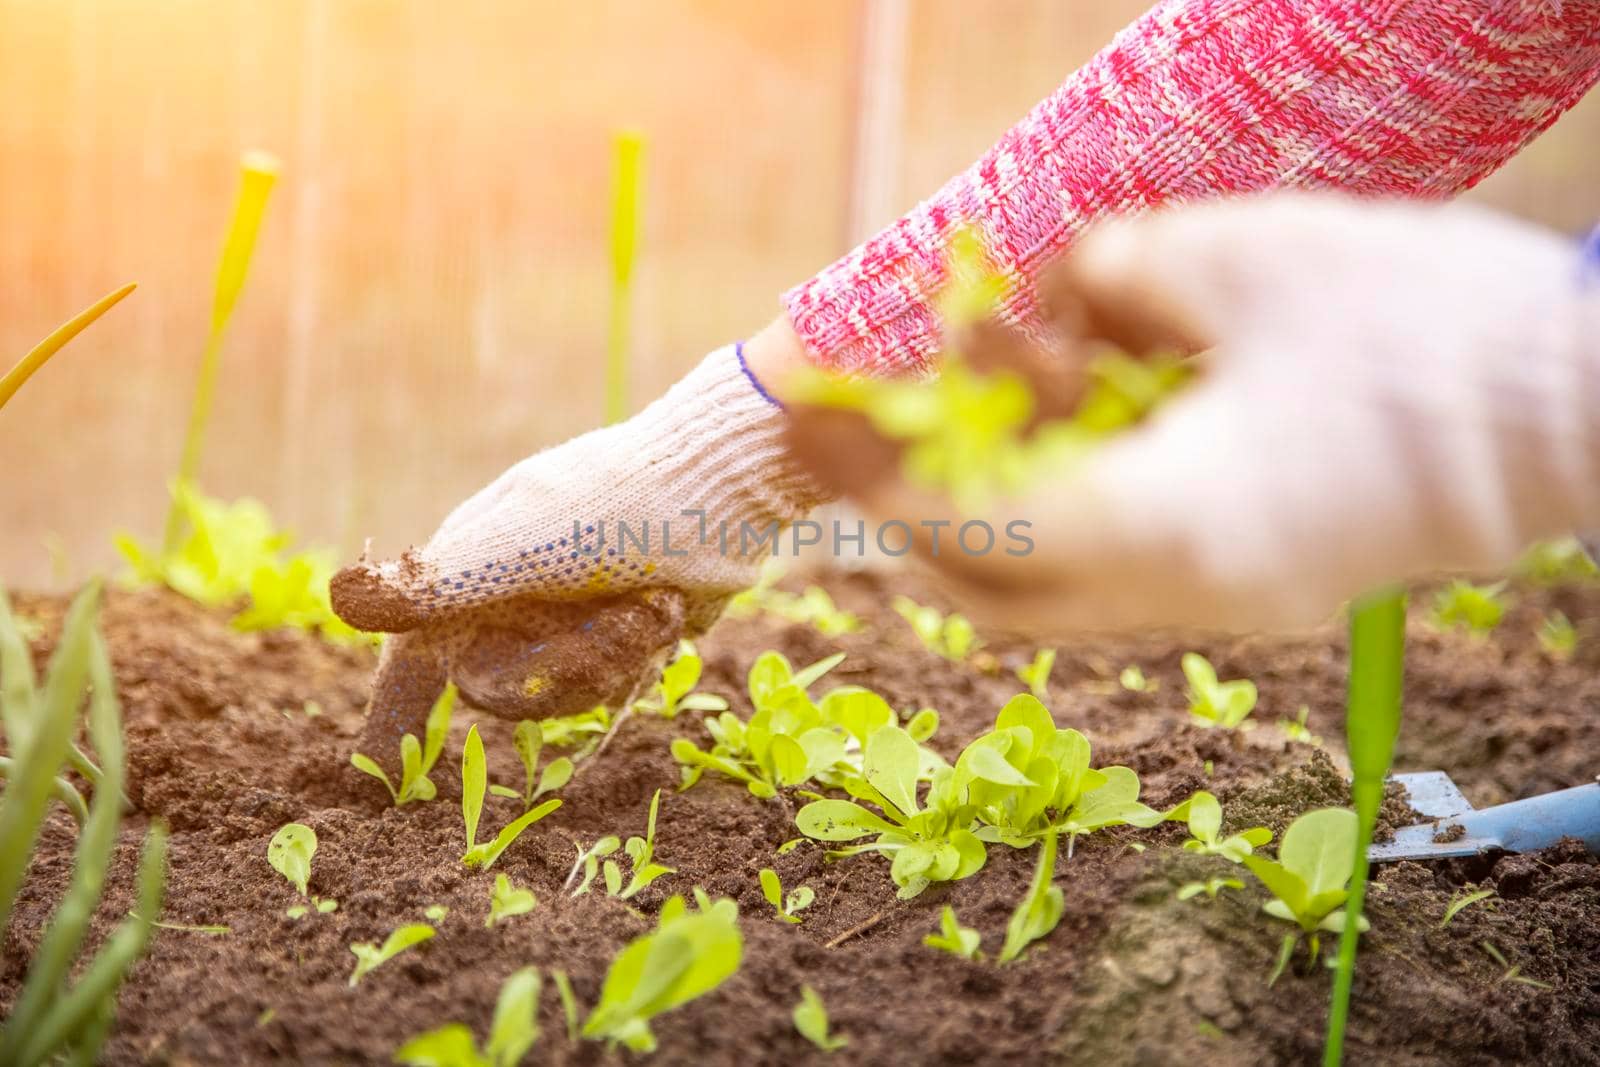 the hands of a gardener in household gloves plants seedlings of young plant sprouts in the ground in a greenhouse by Mariaprovector